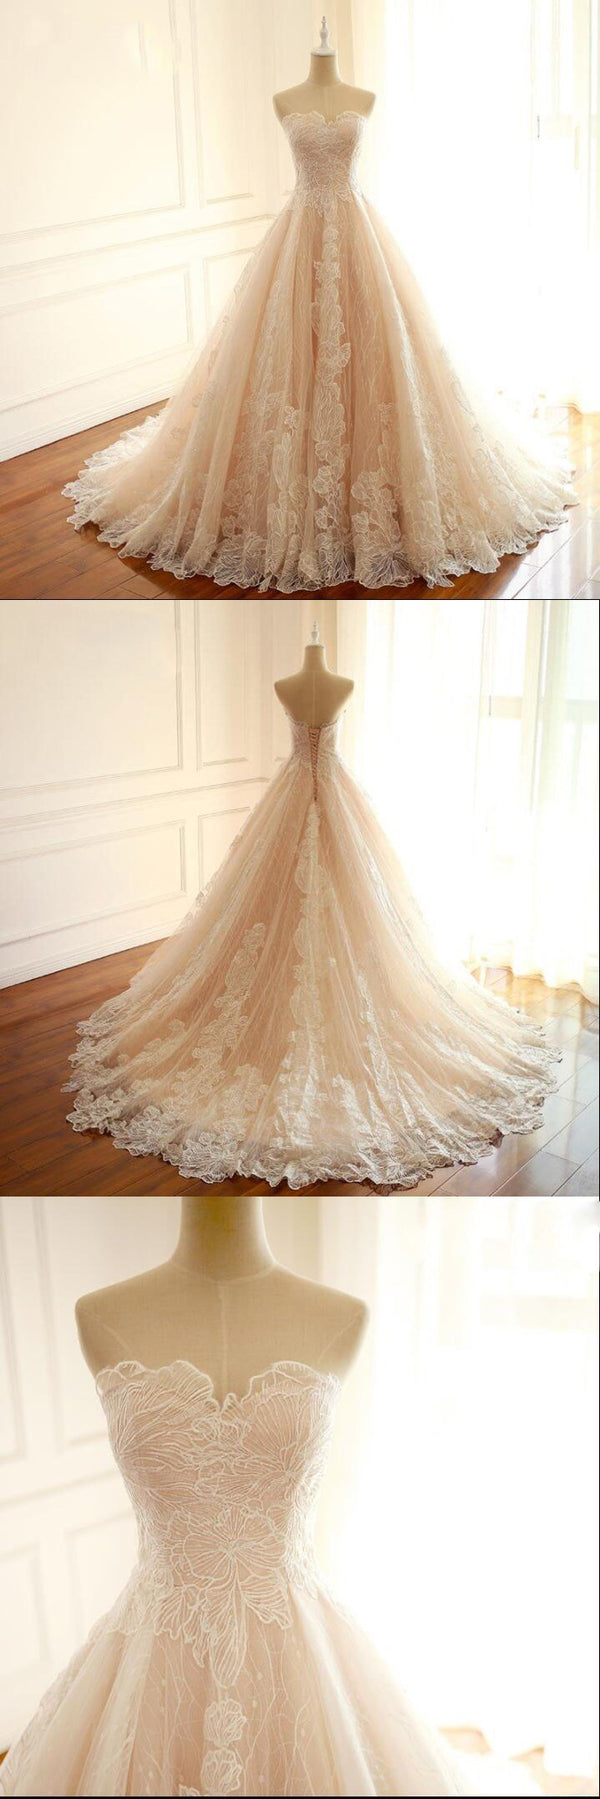 Wedding Dresses Designs, Sleeveless Sweetheart A-Line Lace Up Back Unique Design Wedding Dresses, Newest High Quality Custom Bridal Gown